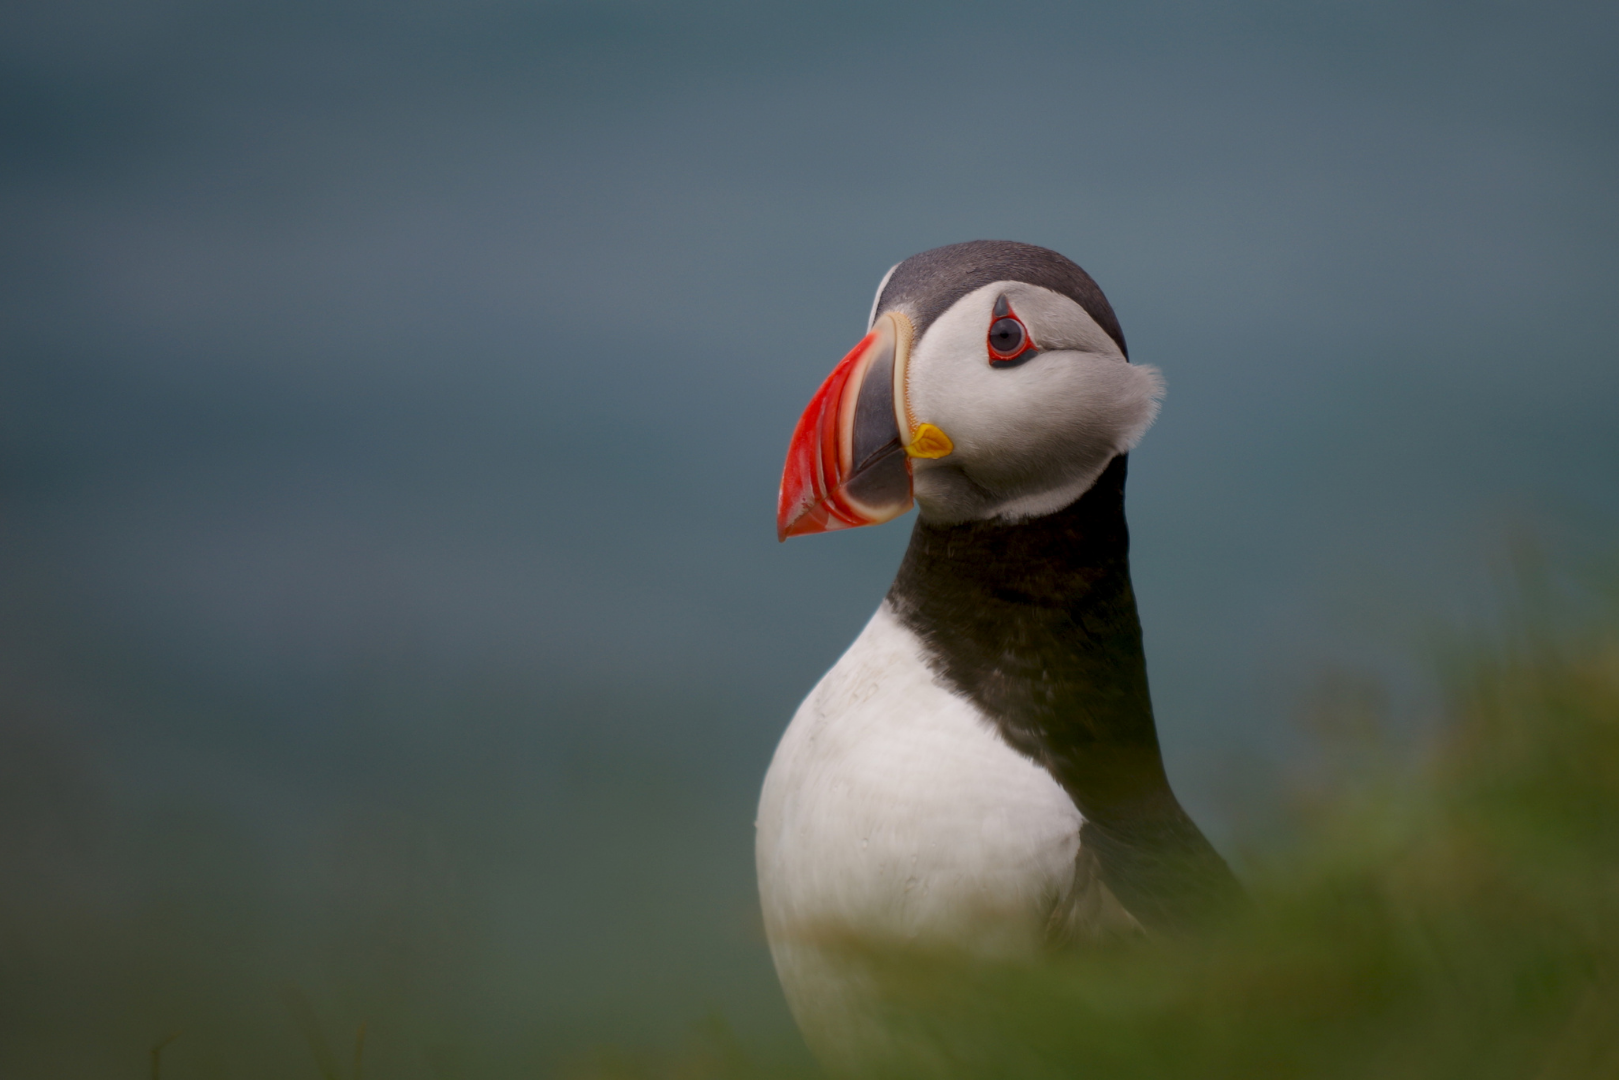 Atlantic Puffin  National Geographic